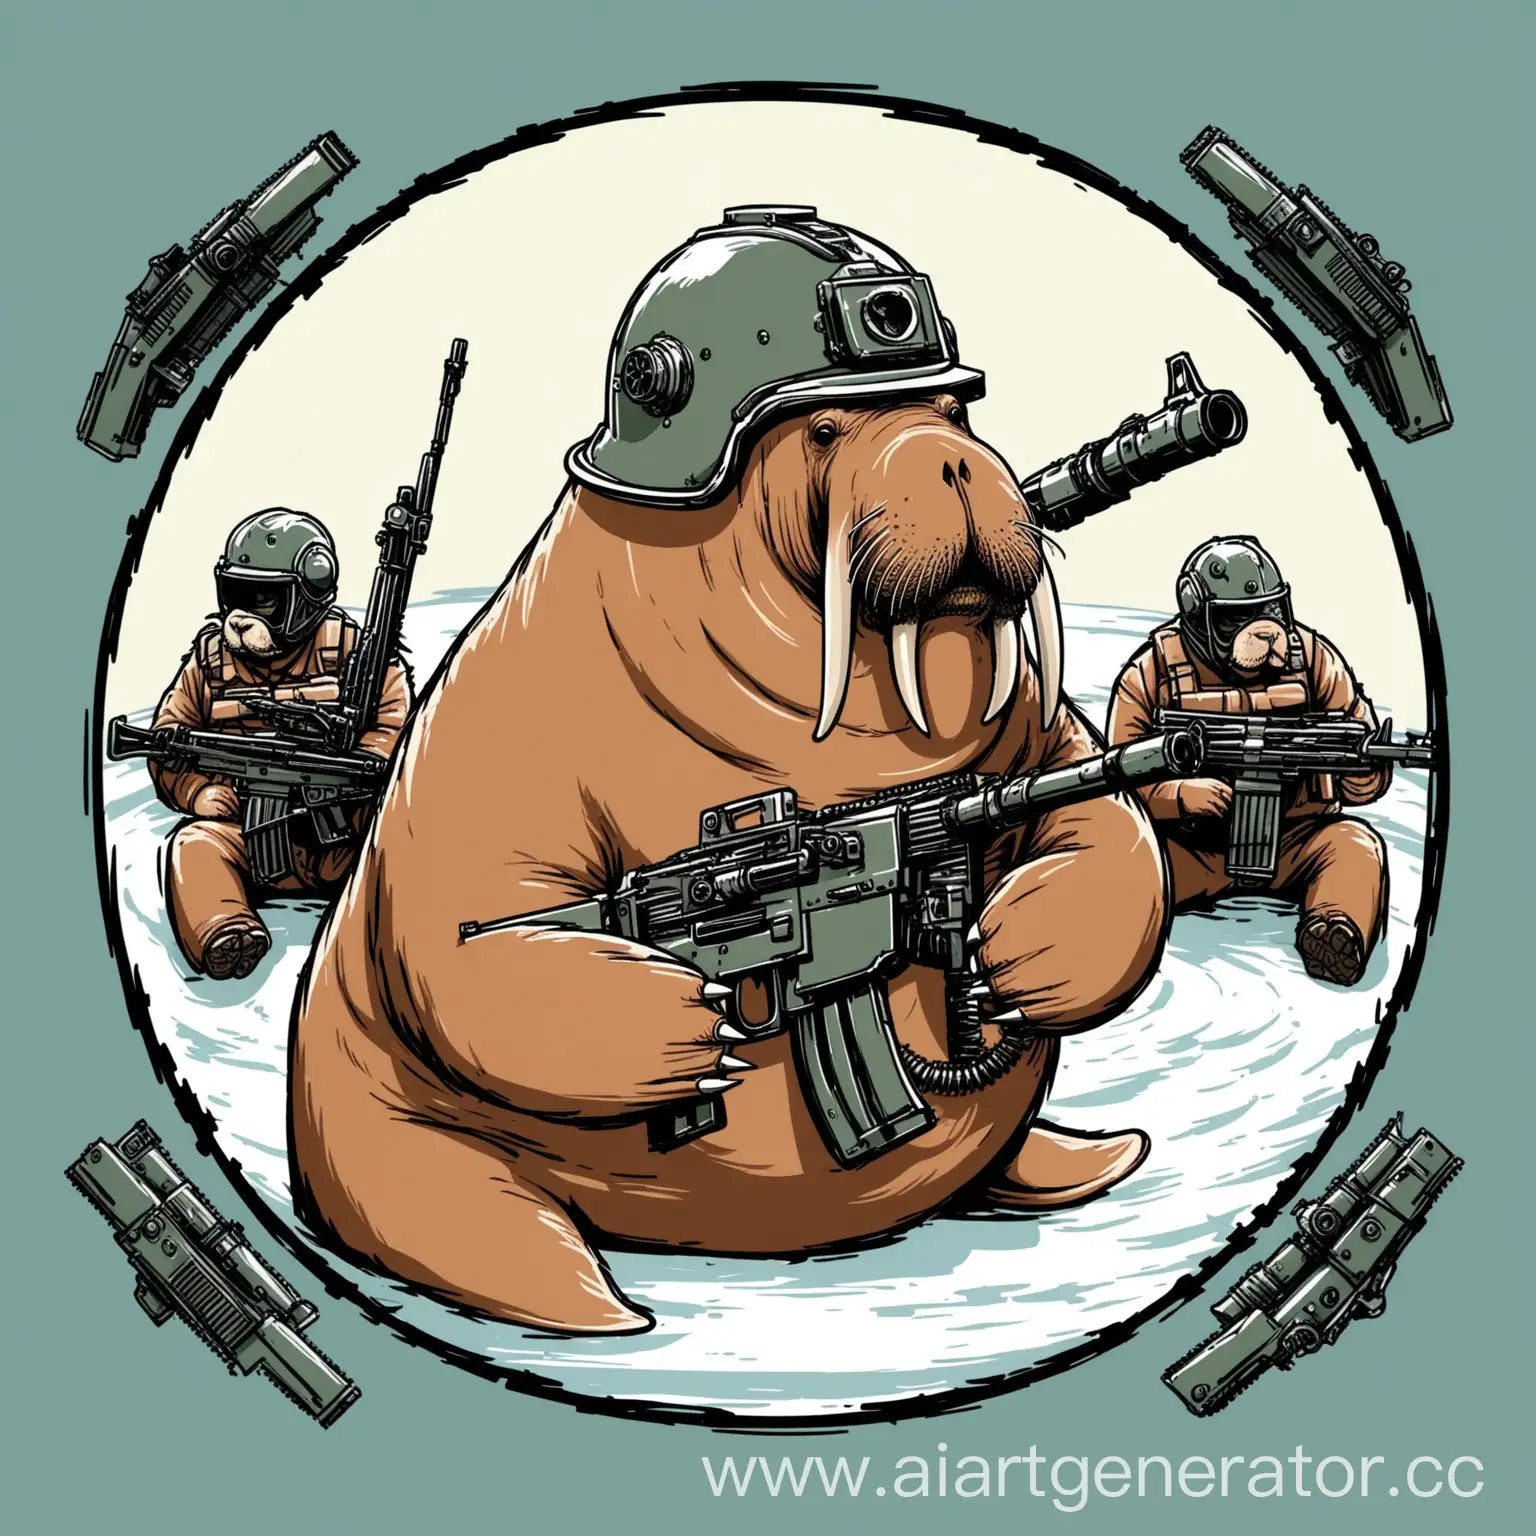 Walrus-with-Machine-Gun-and-Helmet-in-a-Circle